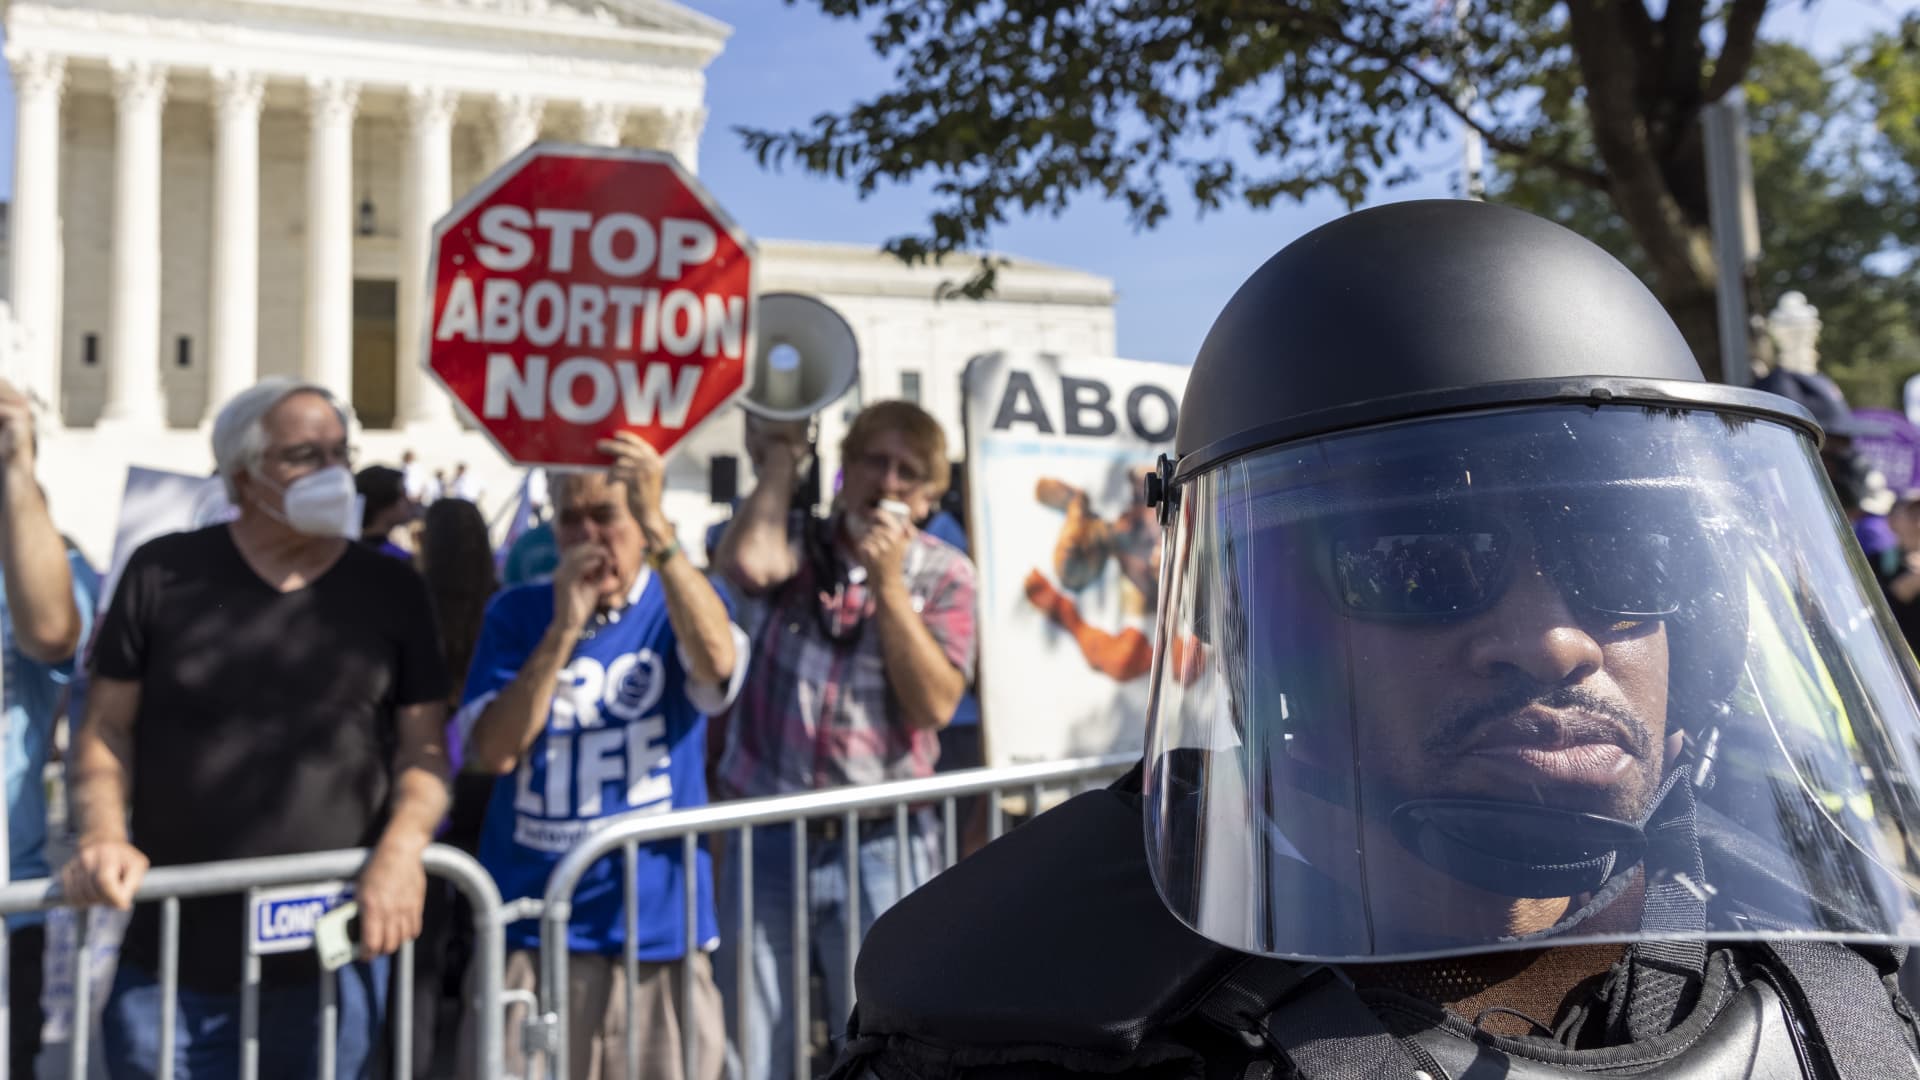 United States Capitol Police in riot gear stand between Women rights activists and anti-abortion activist, as they gather in front of the supreme court after a rally at freedom plaza for the annual Women’s March October 2, 2021 in Washington, DC.